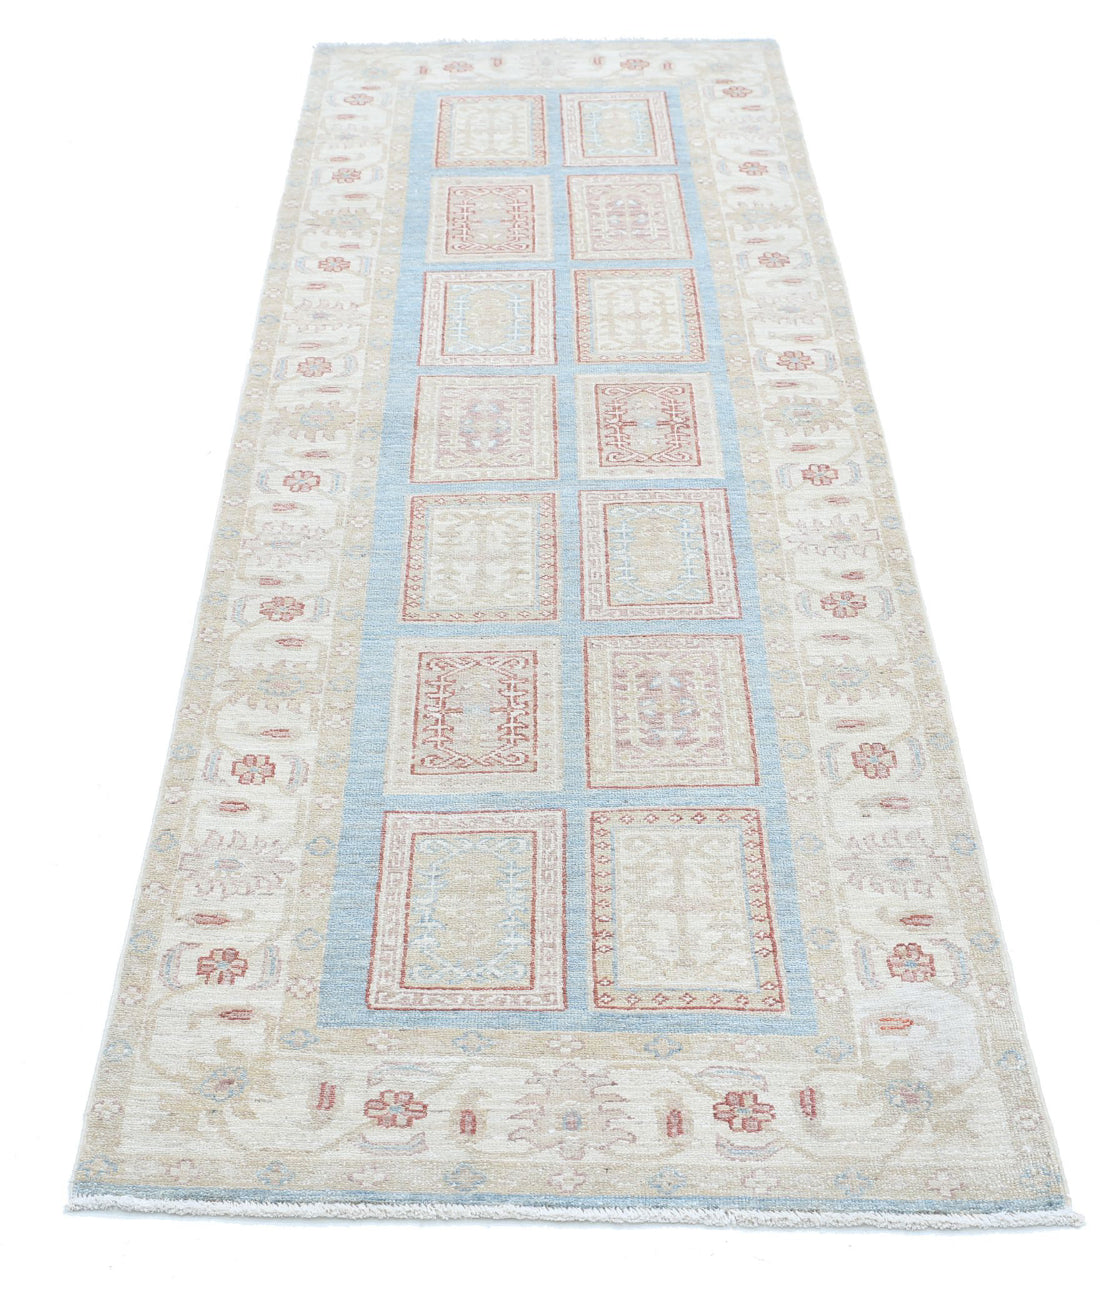 Hand Knotted Serenity Wool Rug - 2'7'' x 8'2'' 2'7'' x 8'2'' (78 X 245) / Blue / Ivory